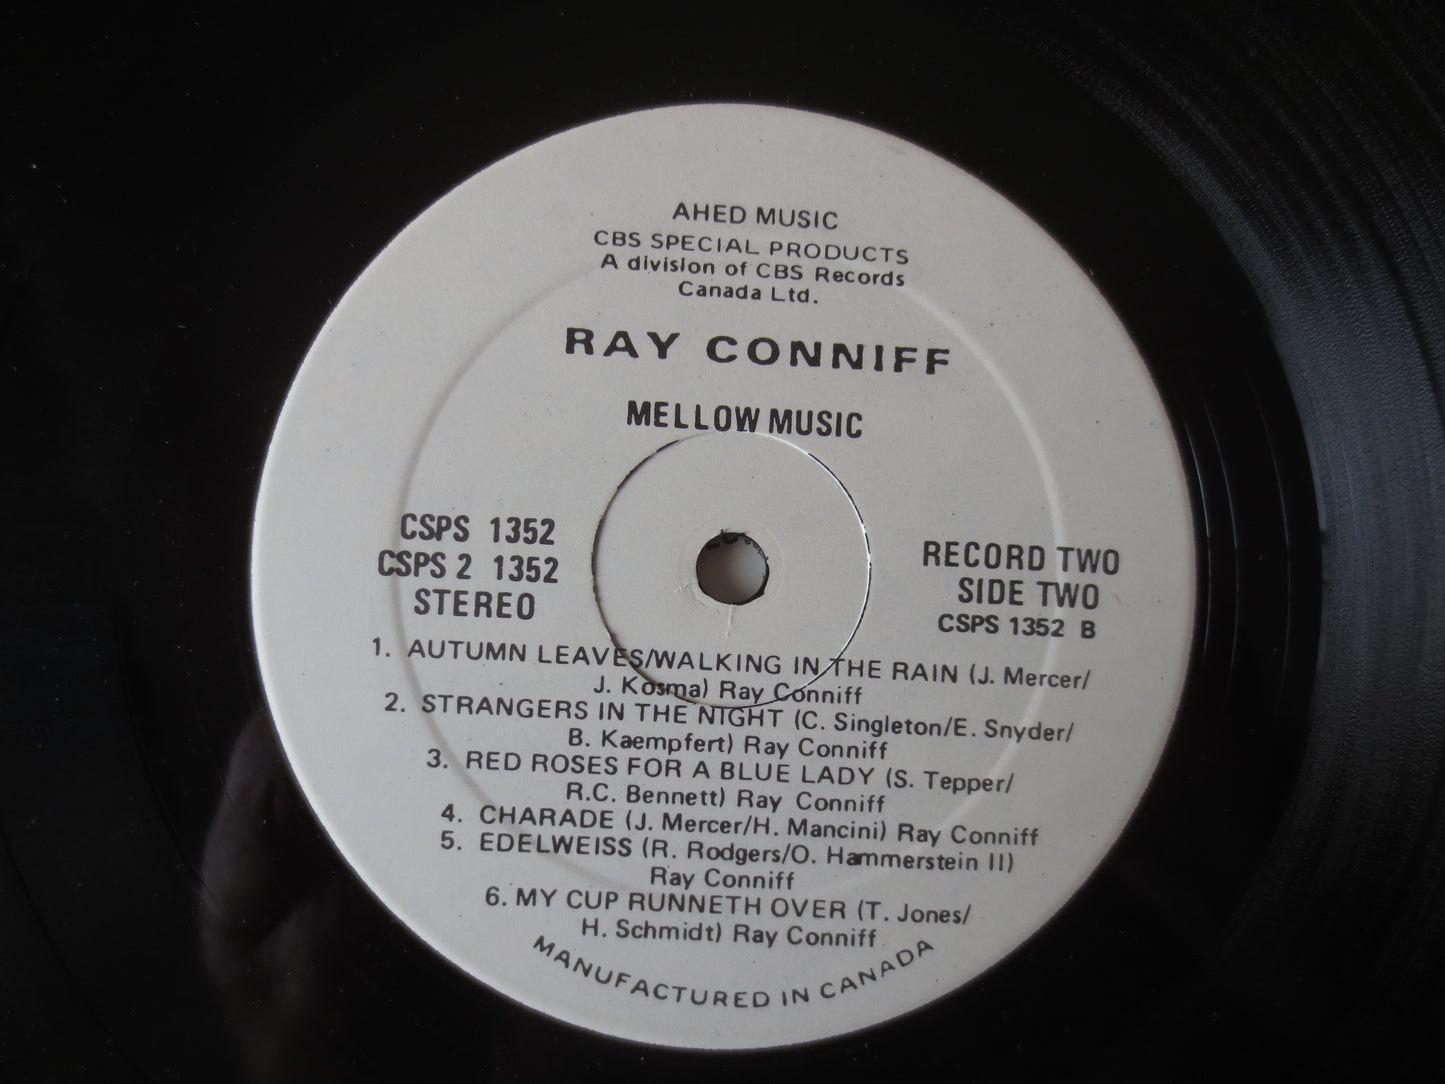 RAY CONNIFF, Mellow MUSIC, Ray Conniff Records, Ray Conniff Albums, Ray Conniff Singers, Vinyl Record, Vinyl, 1979 Records